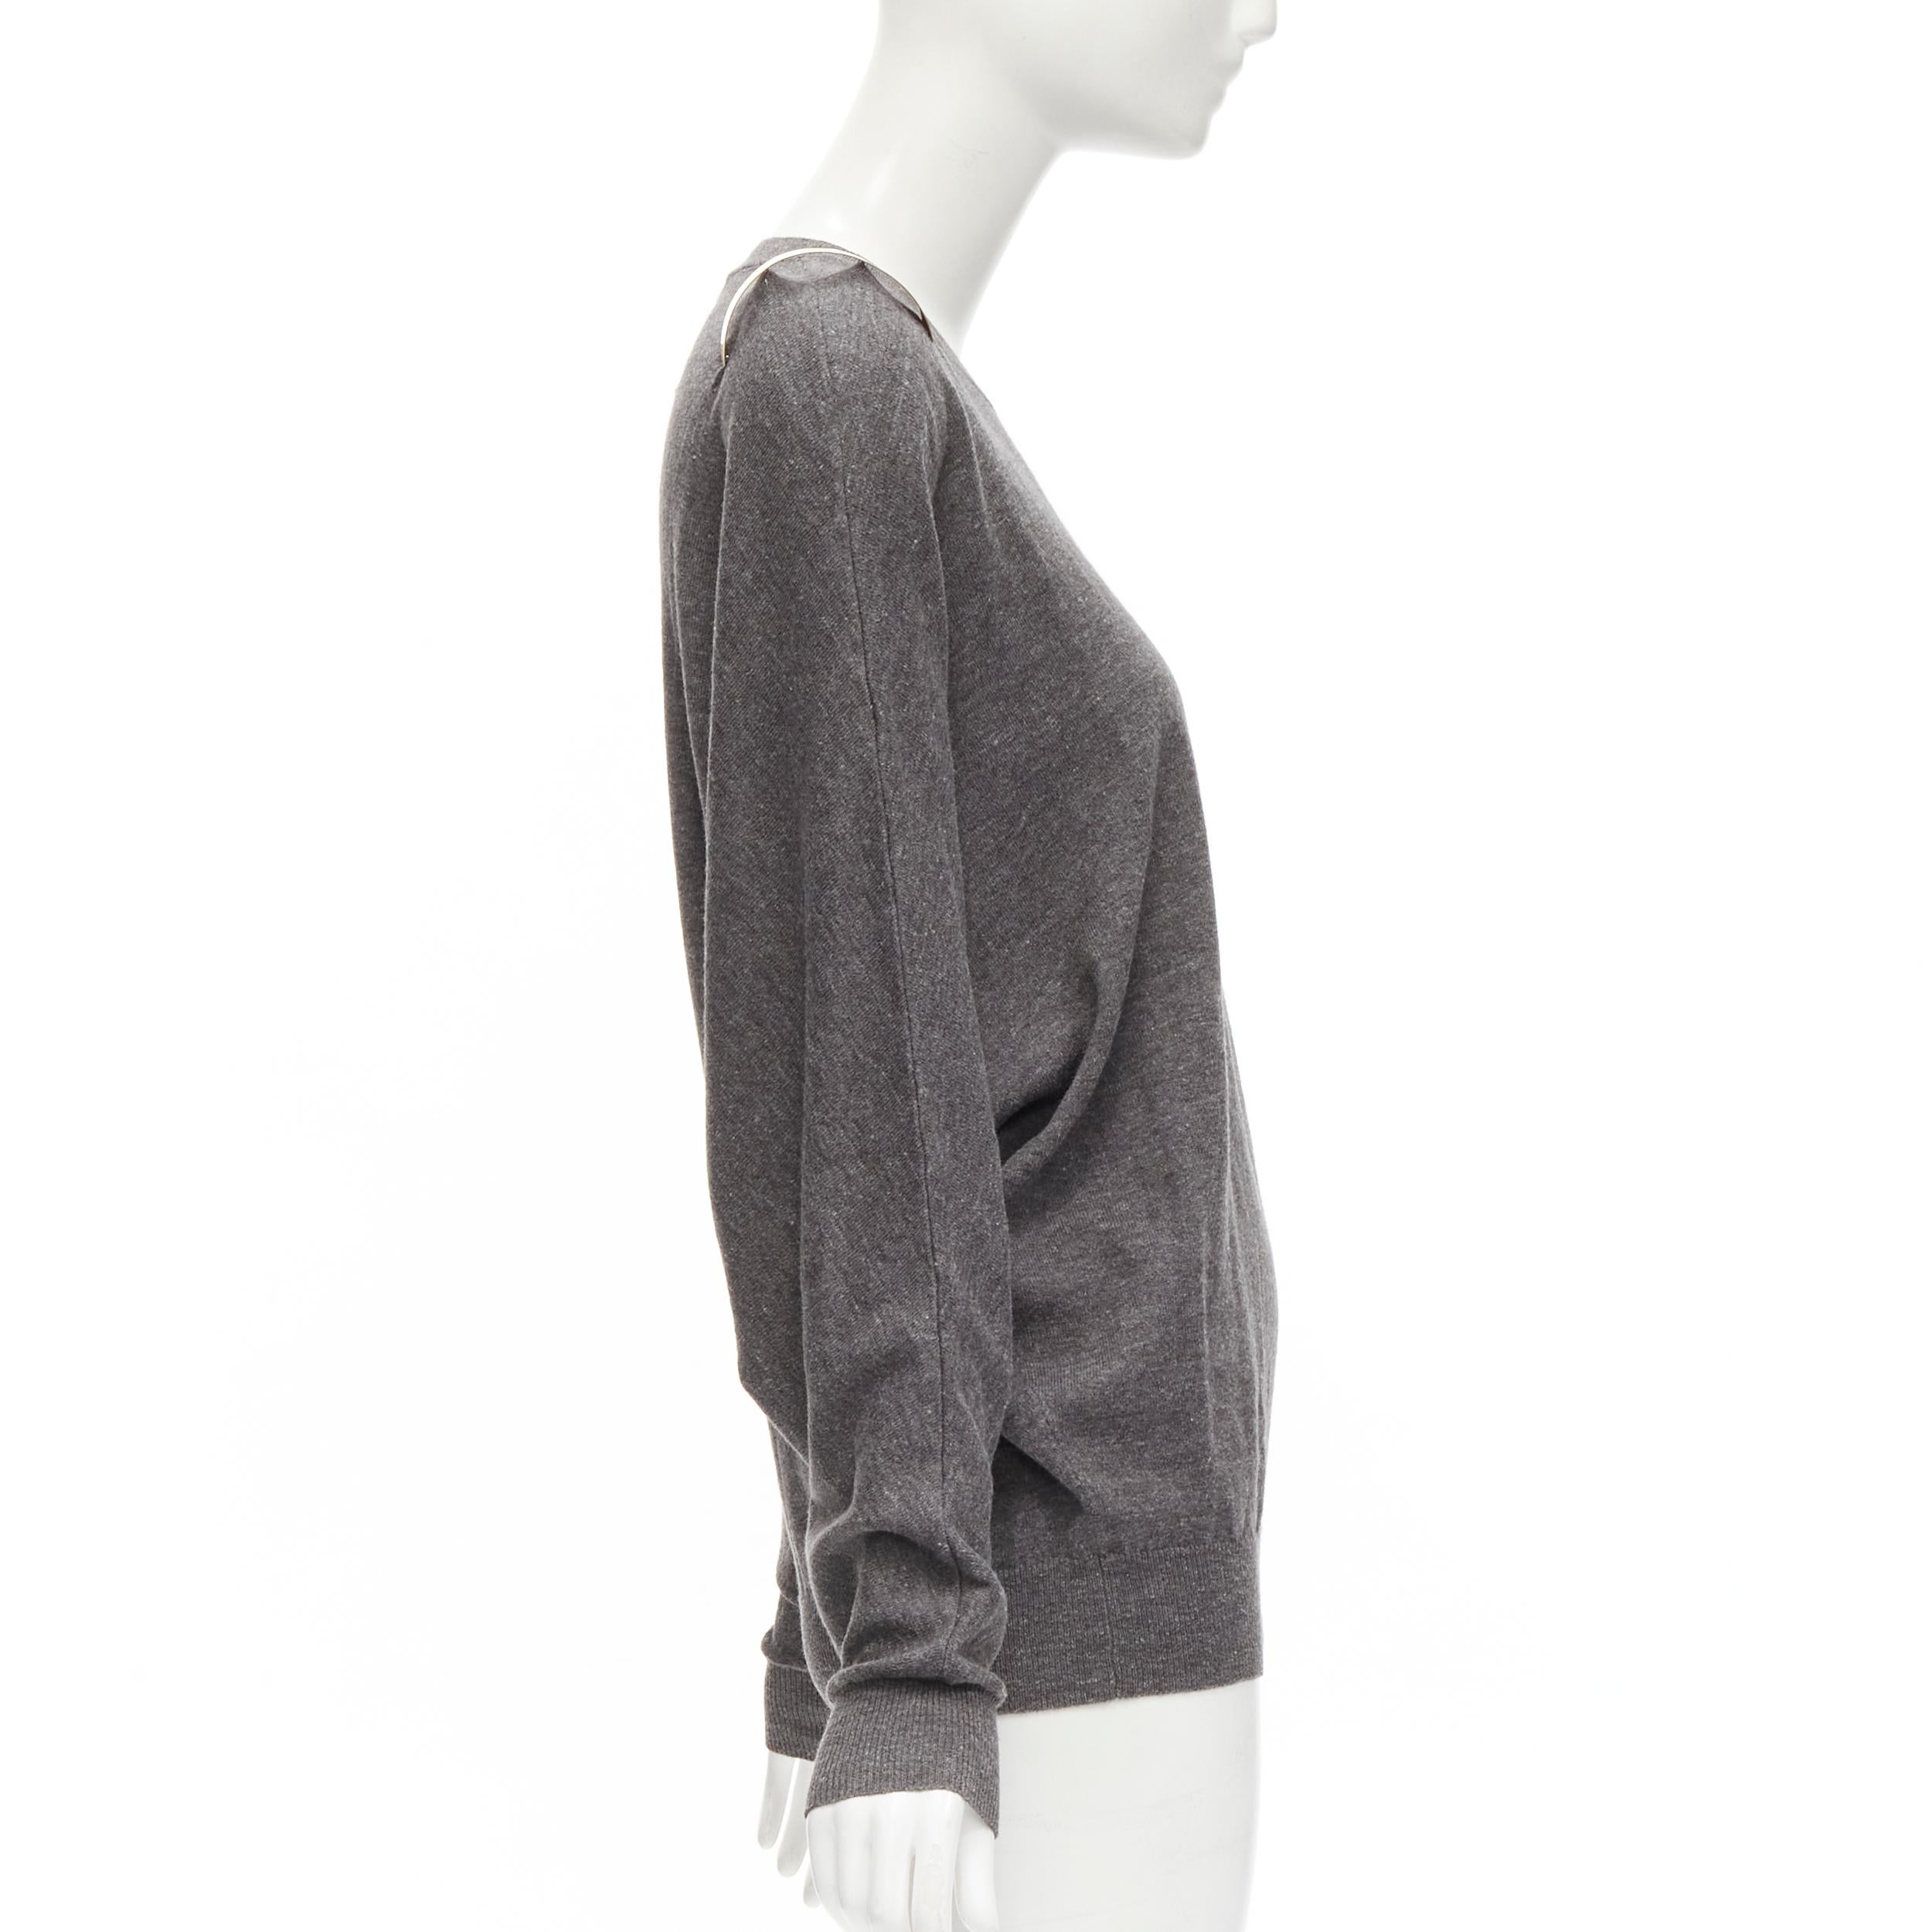 GIVENCHY Riccardo Tisci gold metal shoulder bar cuff grey wool alpaca sweater S In Excellent Condition For Sale In Hong Kong, NT